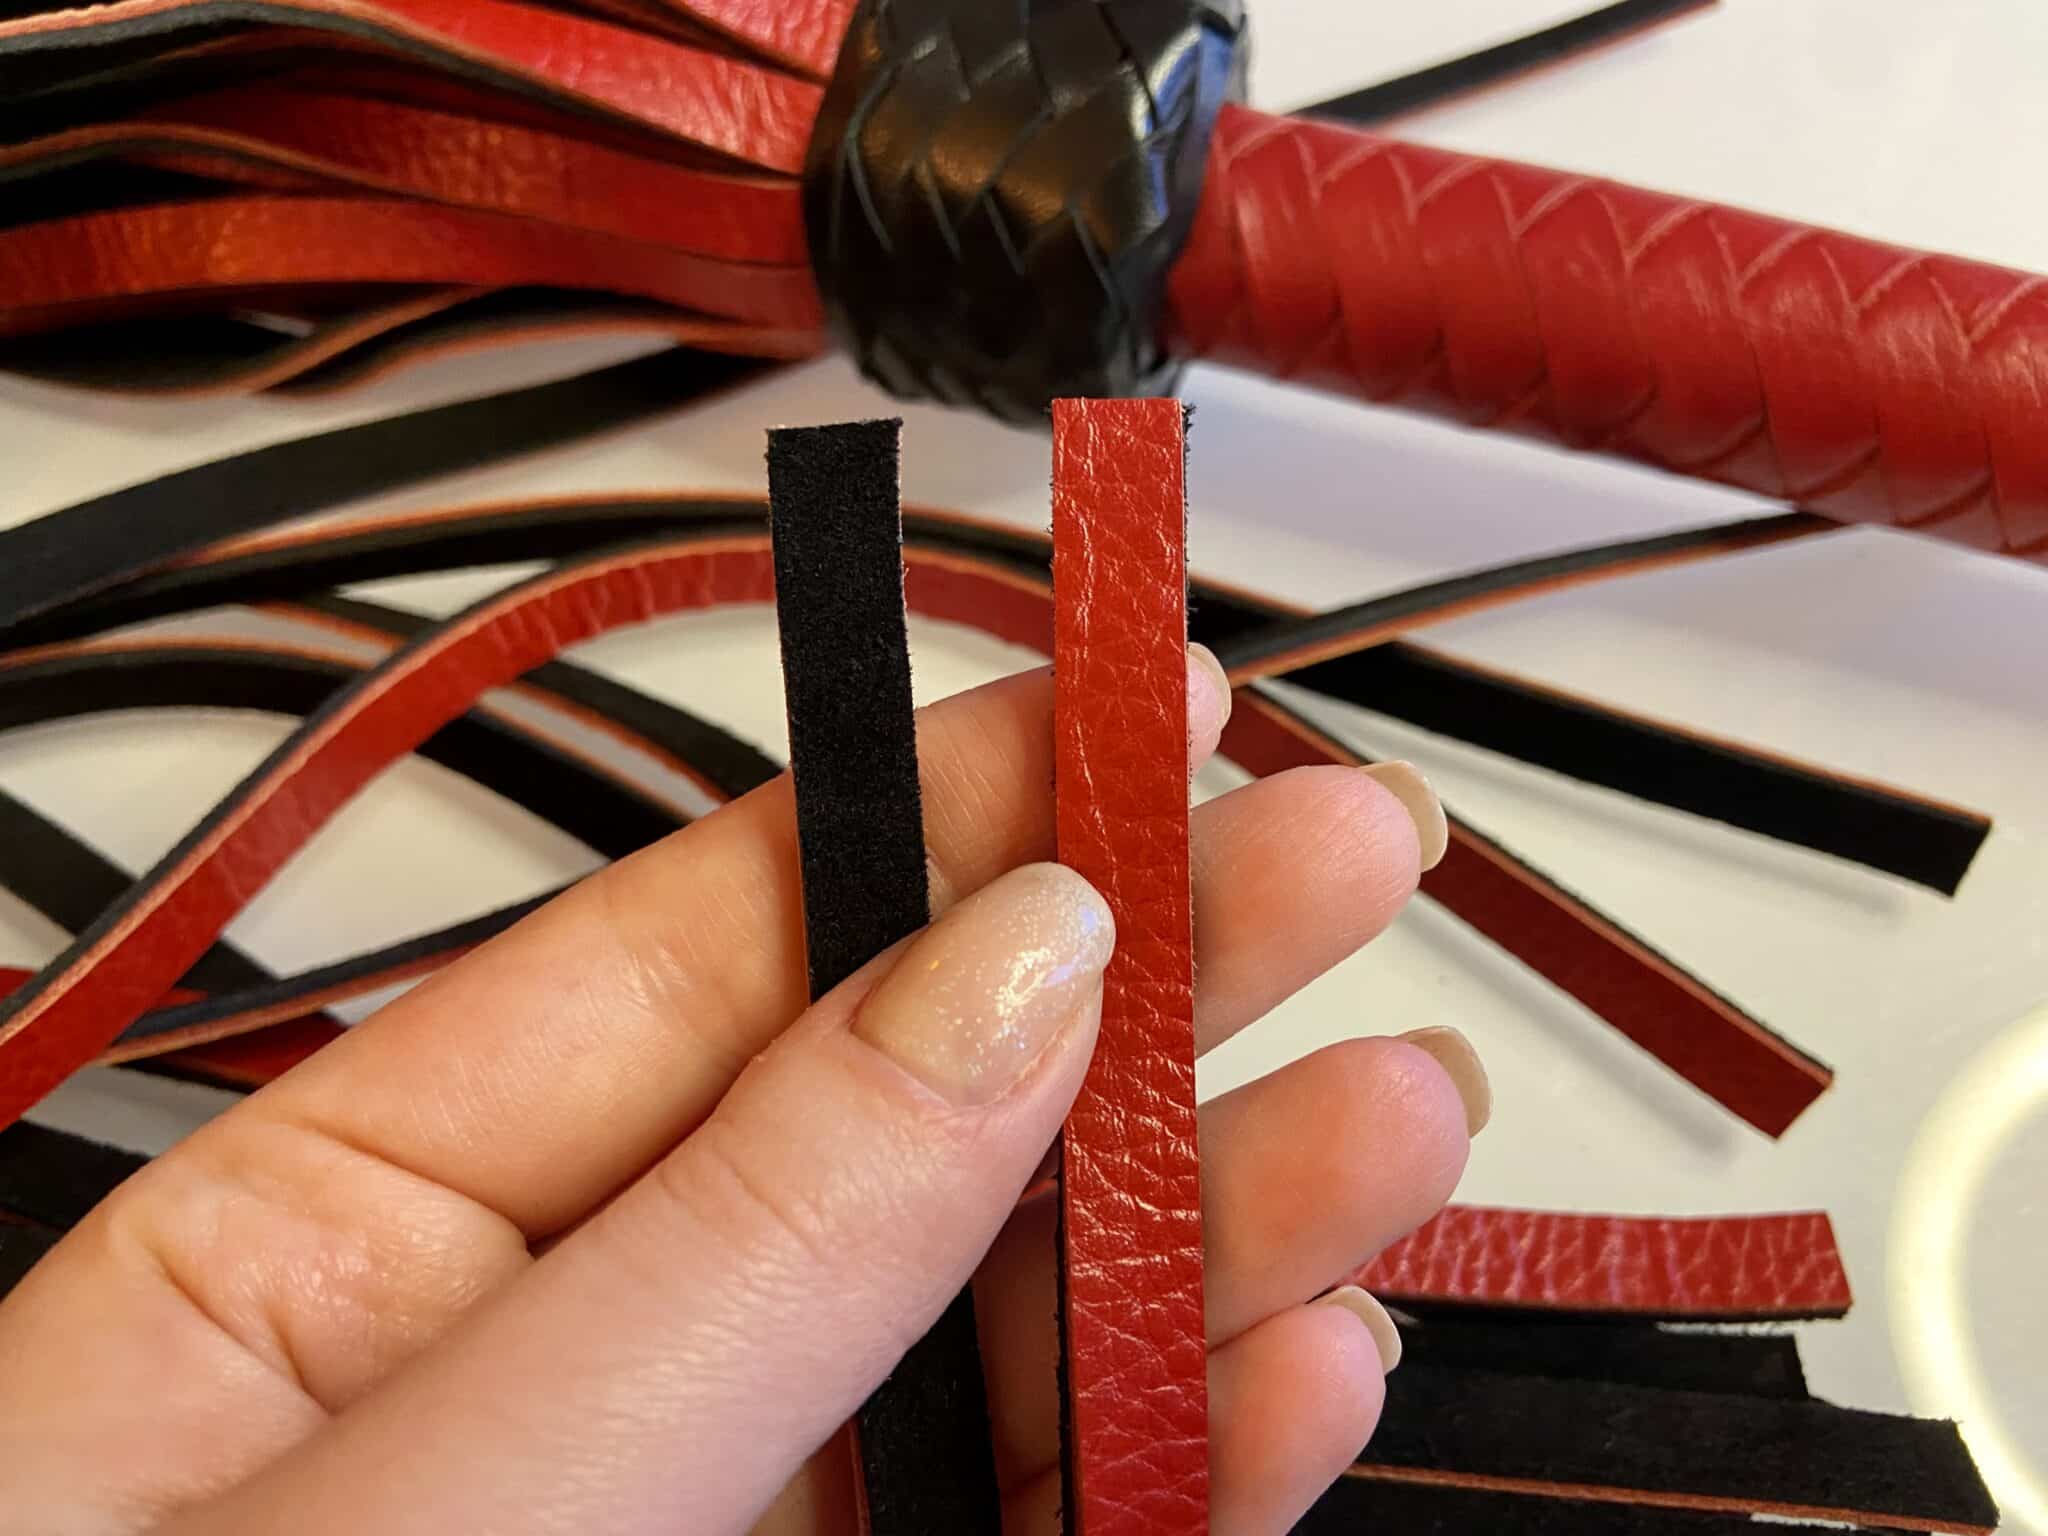 Strict Leather Flogger Superior Quality or Just Hype?